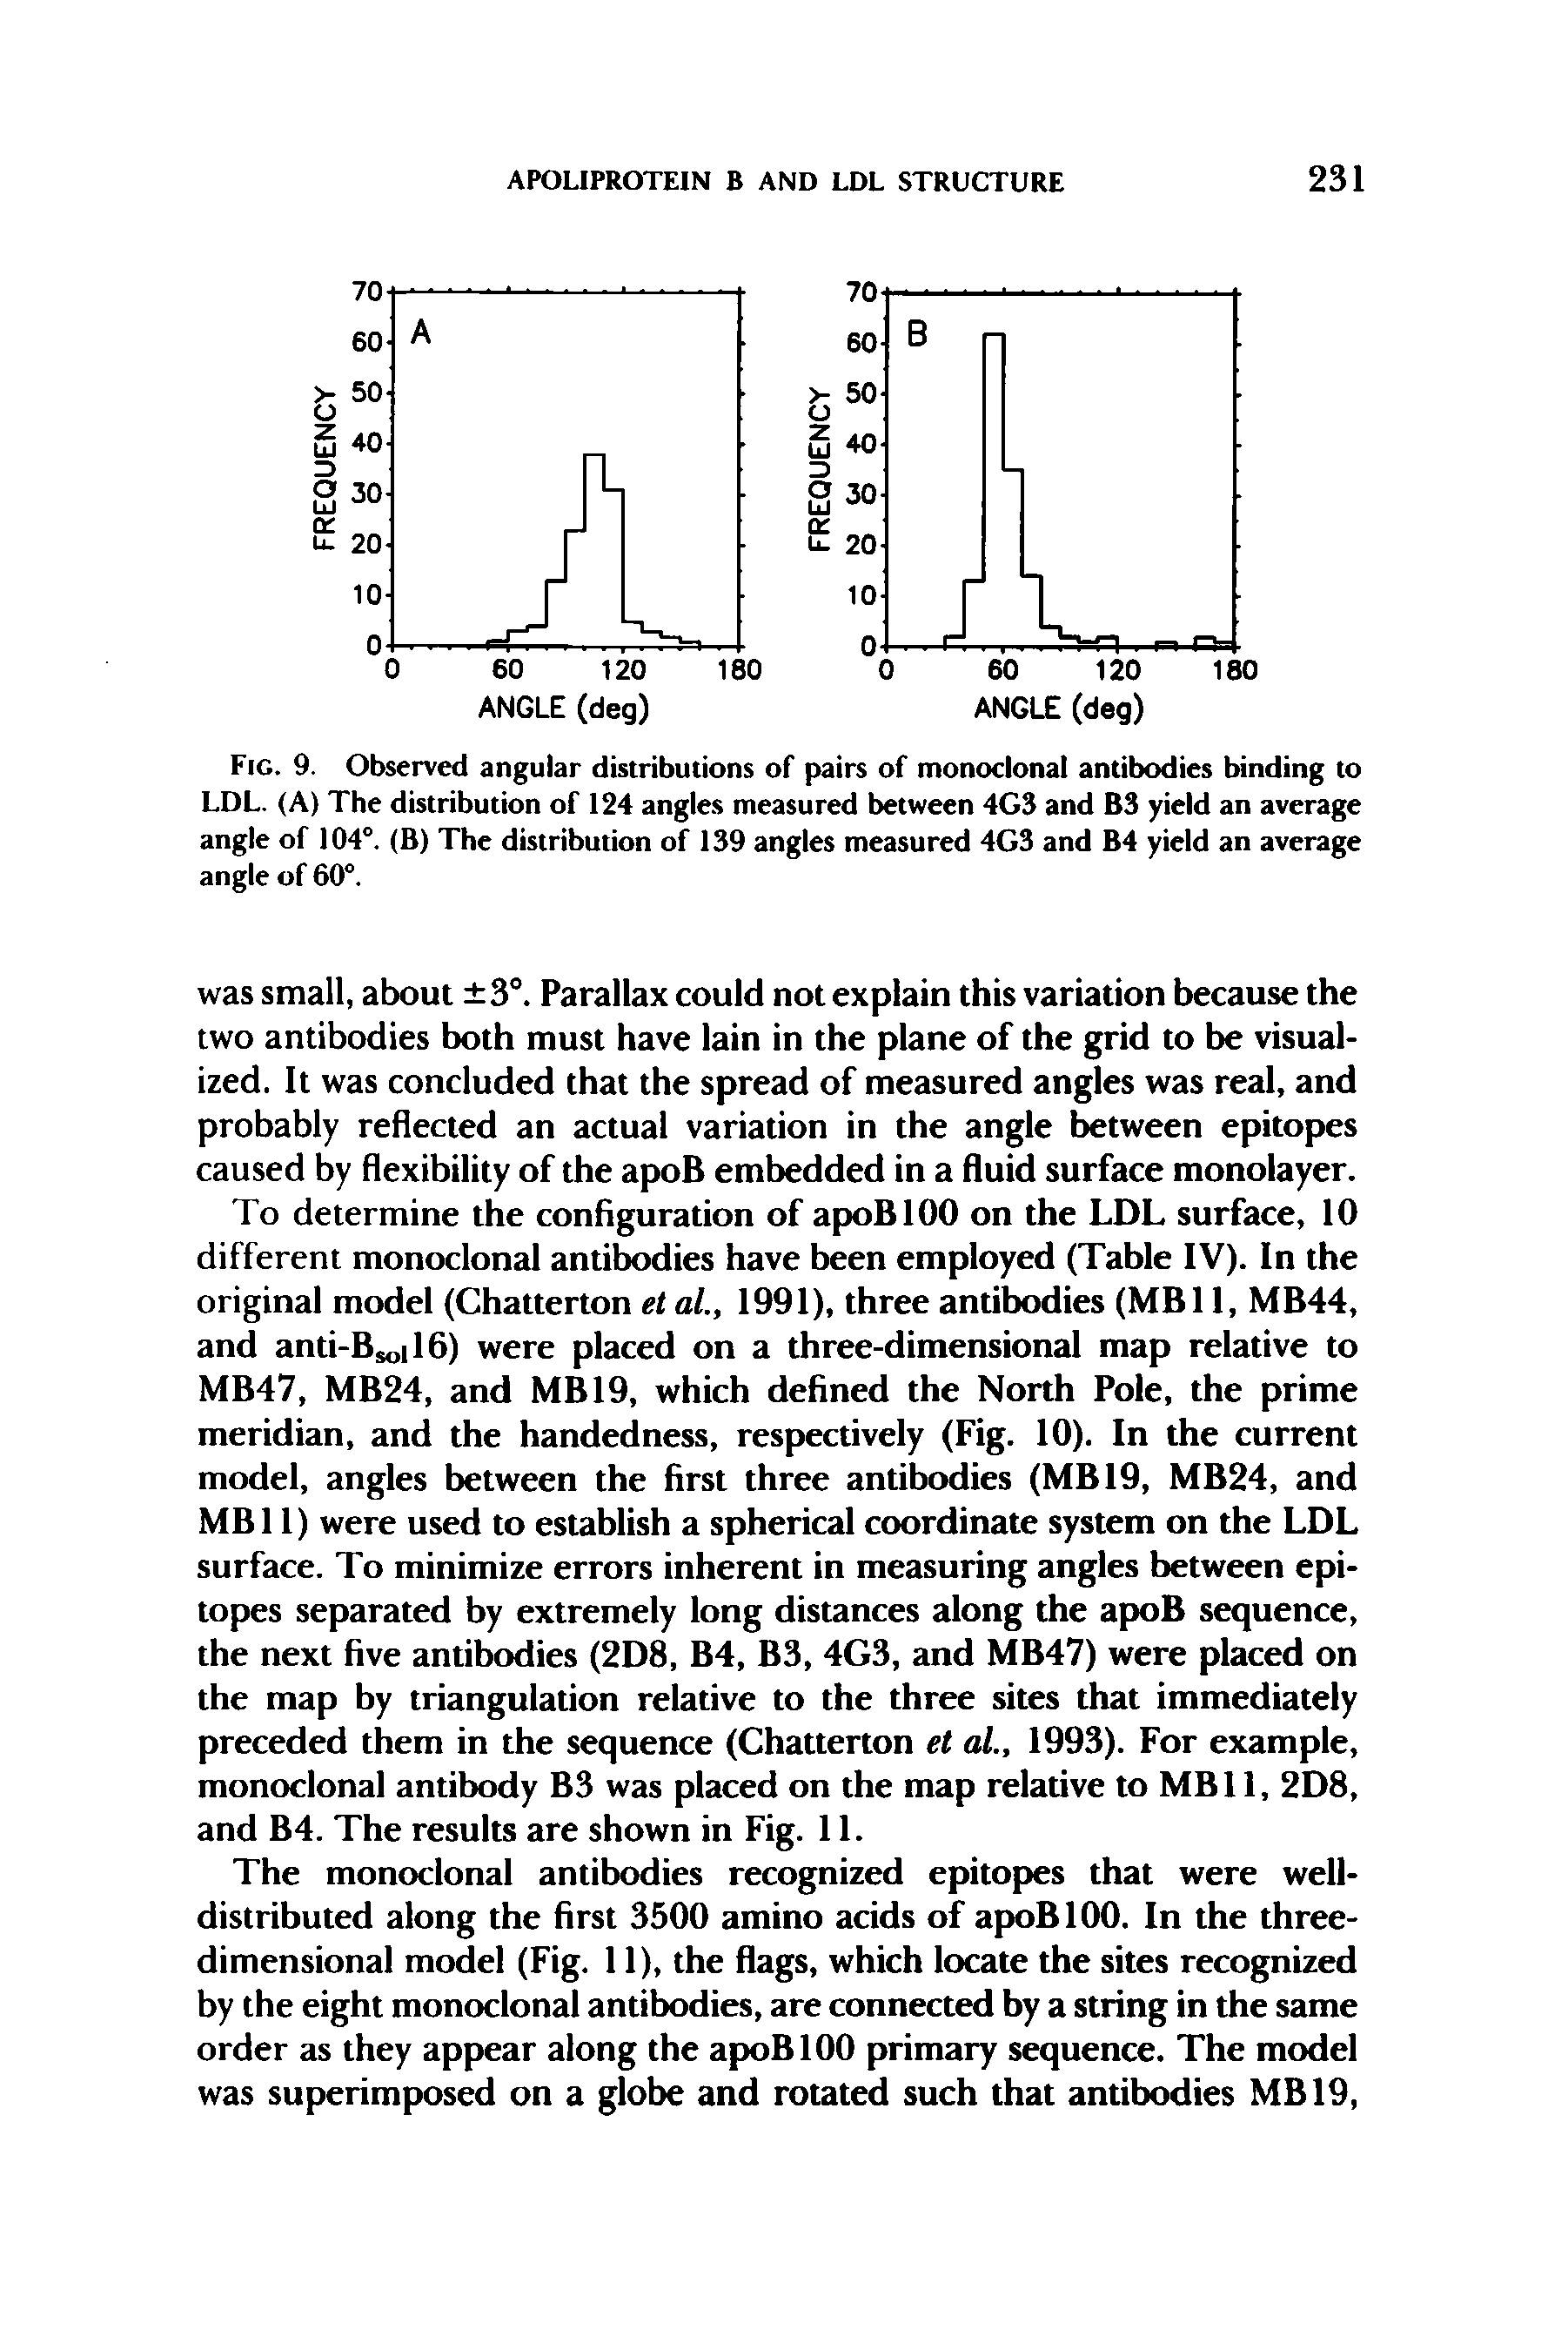 Fig. 9. Observed angular distributions of pairs of monoclonal antibodies binding to LDL. (A) The distribution of 124 angles measured between 4G3 and B3 yield an average angle of 104°. (B) The distribution of 139 angles measured 4G3 and B4 yield an average angle of 60°.